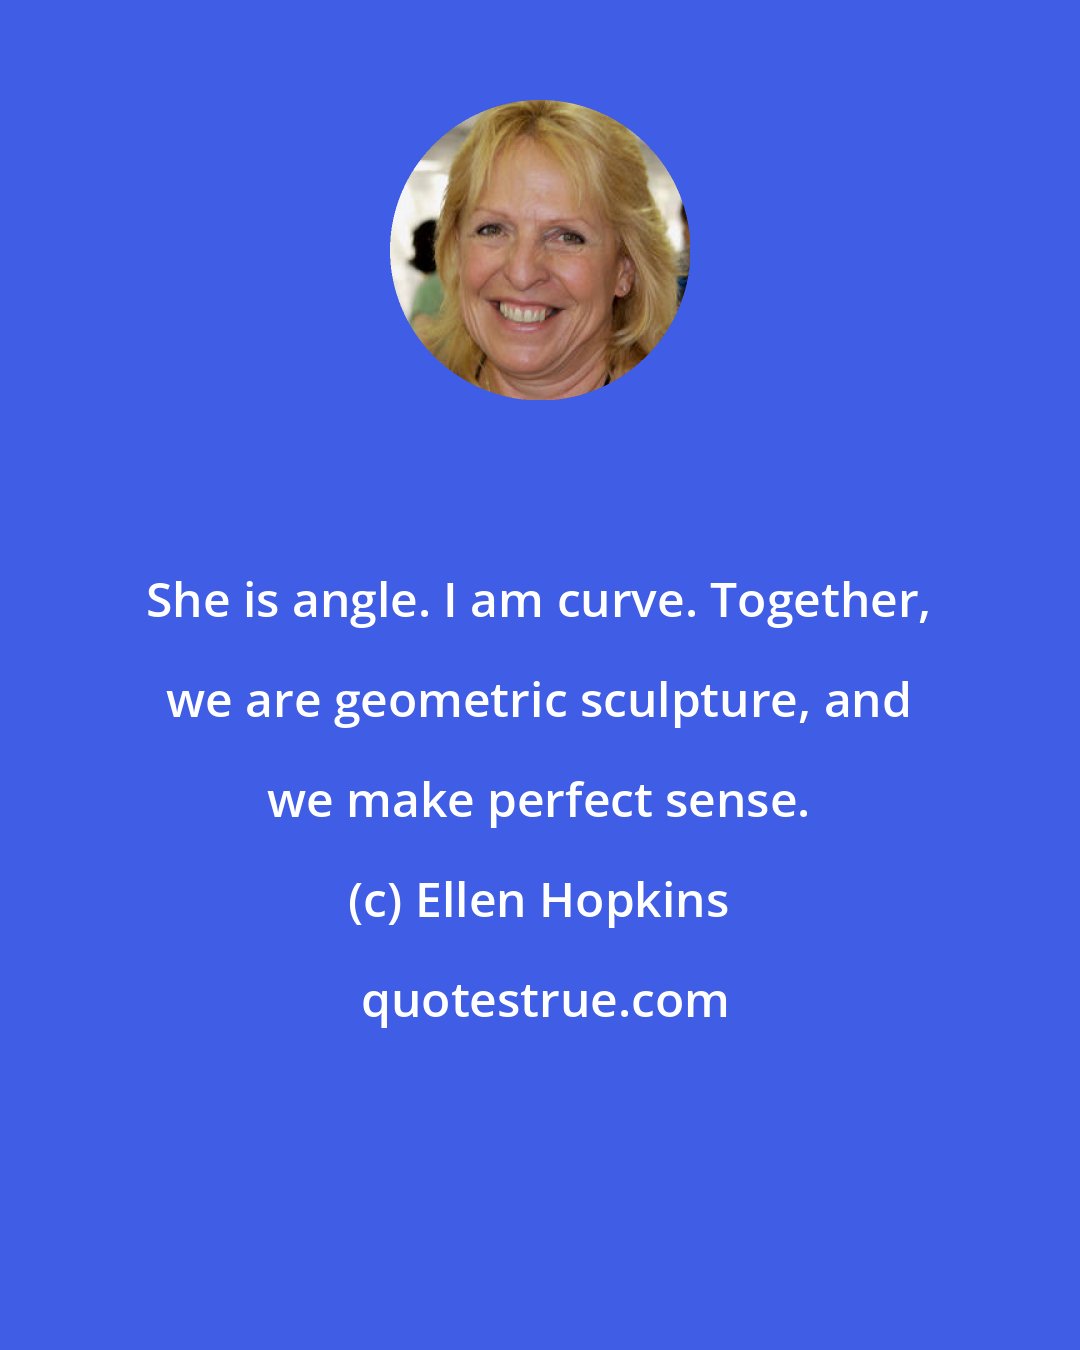 Ellen Hopkins: She is angle. I am curve. Together, we are geometric sculpture, and we make perfect sense.